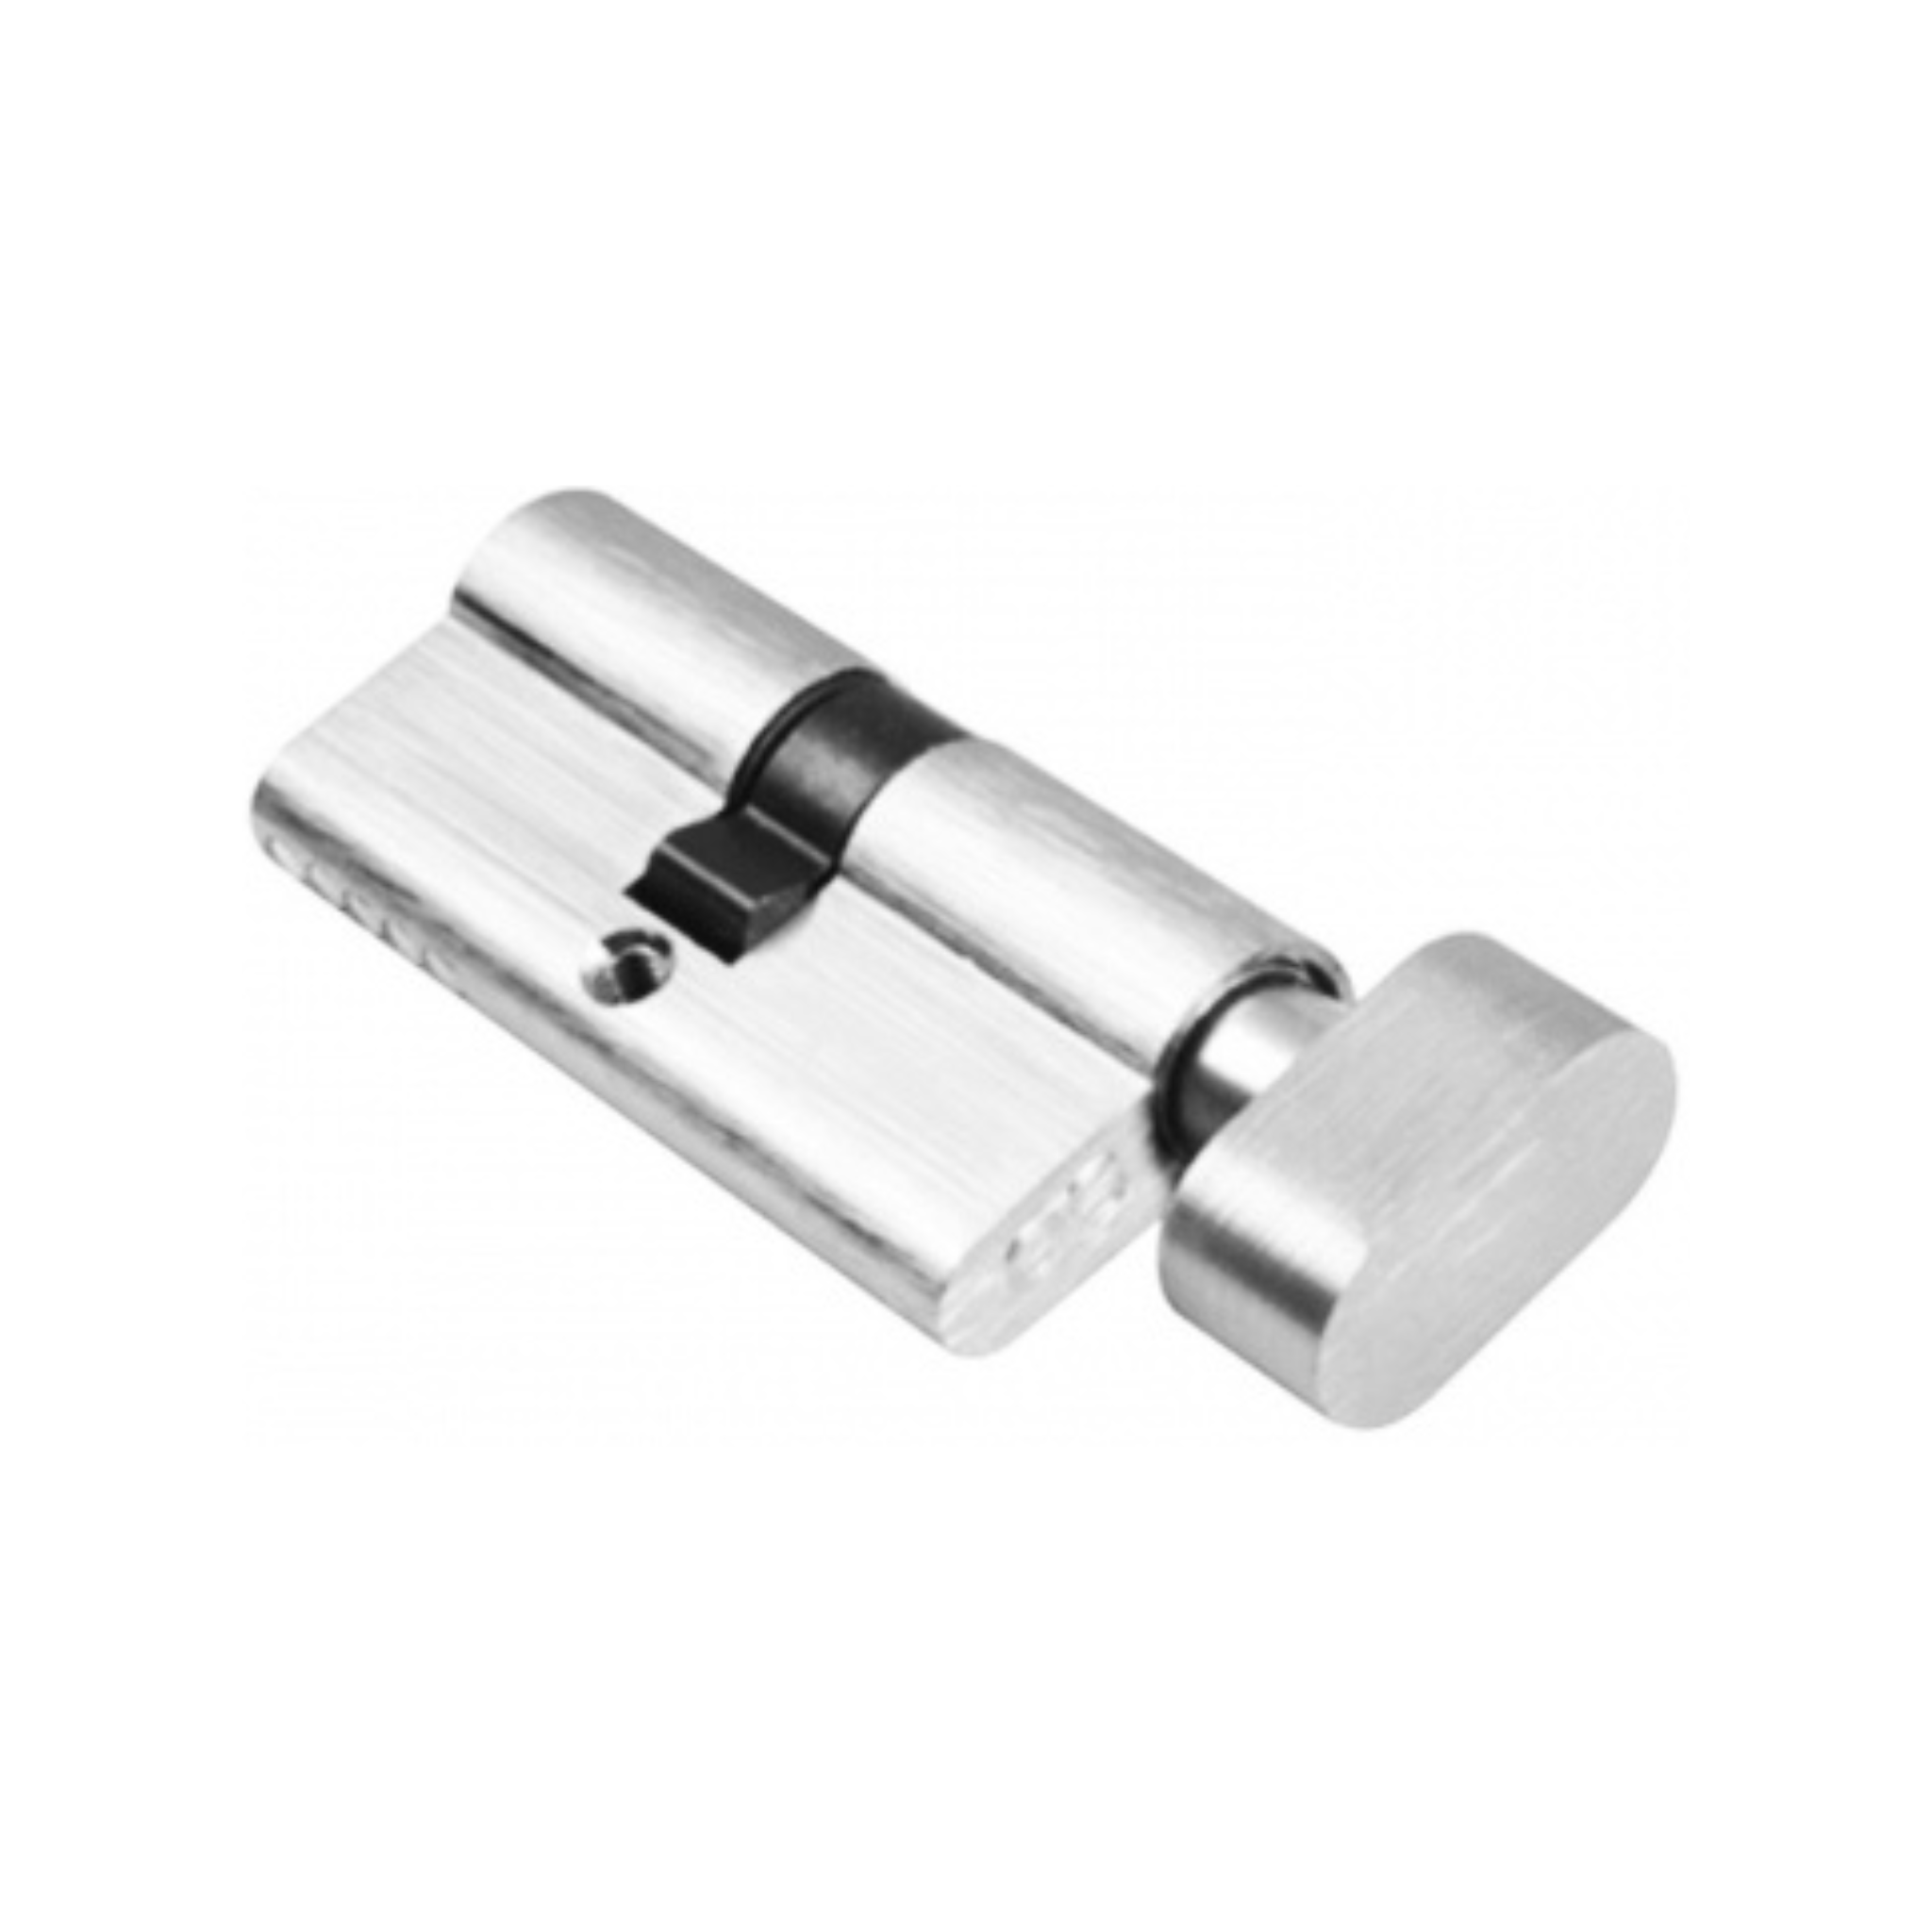 QS1108A, 65mm - 32.5/32.5, Double Cylinder, Elemental, Thumbturn to Key, Keyed to Differ (Standard), 3 Keys, 5 Pin, Aluminium Based Cylinder, Satin Finish, QS